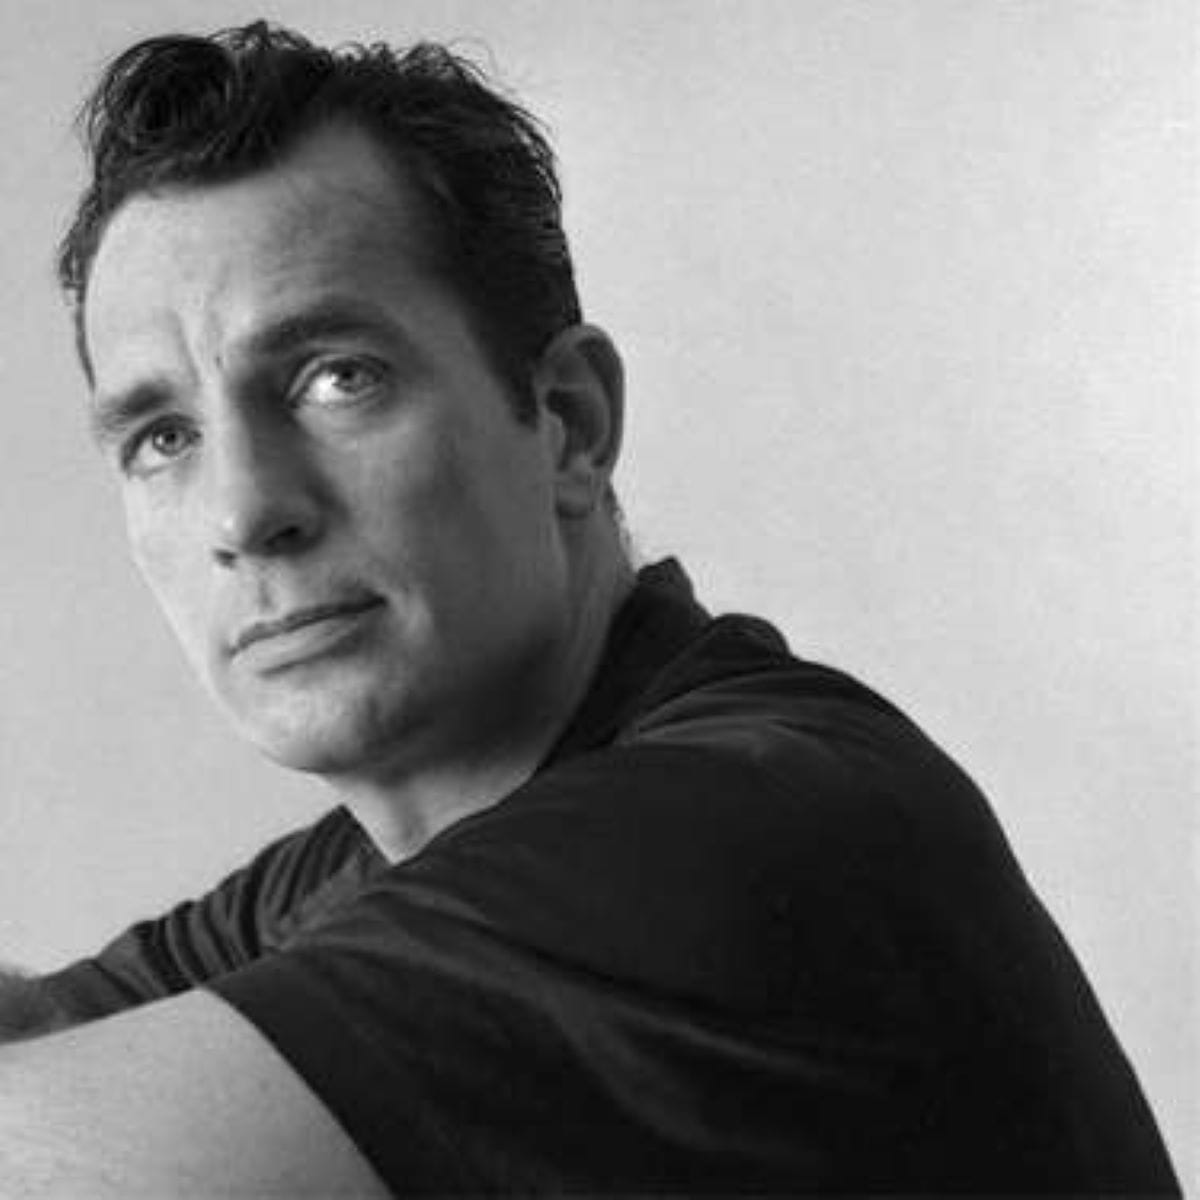 The story of writer Jack Kerouac and his relationship with Mexico